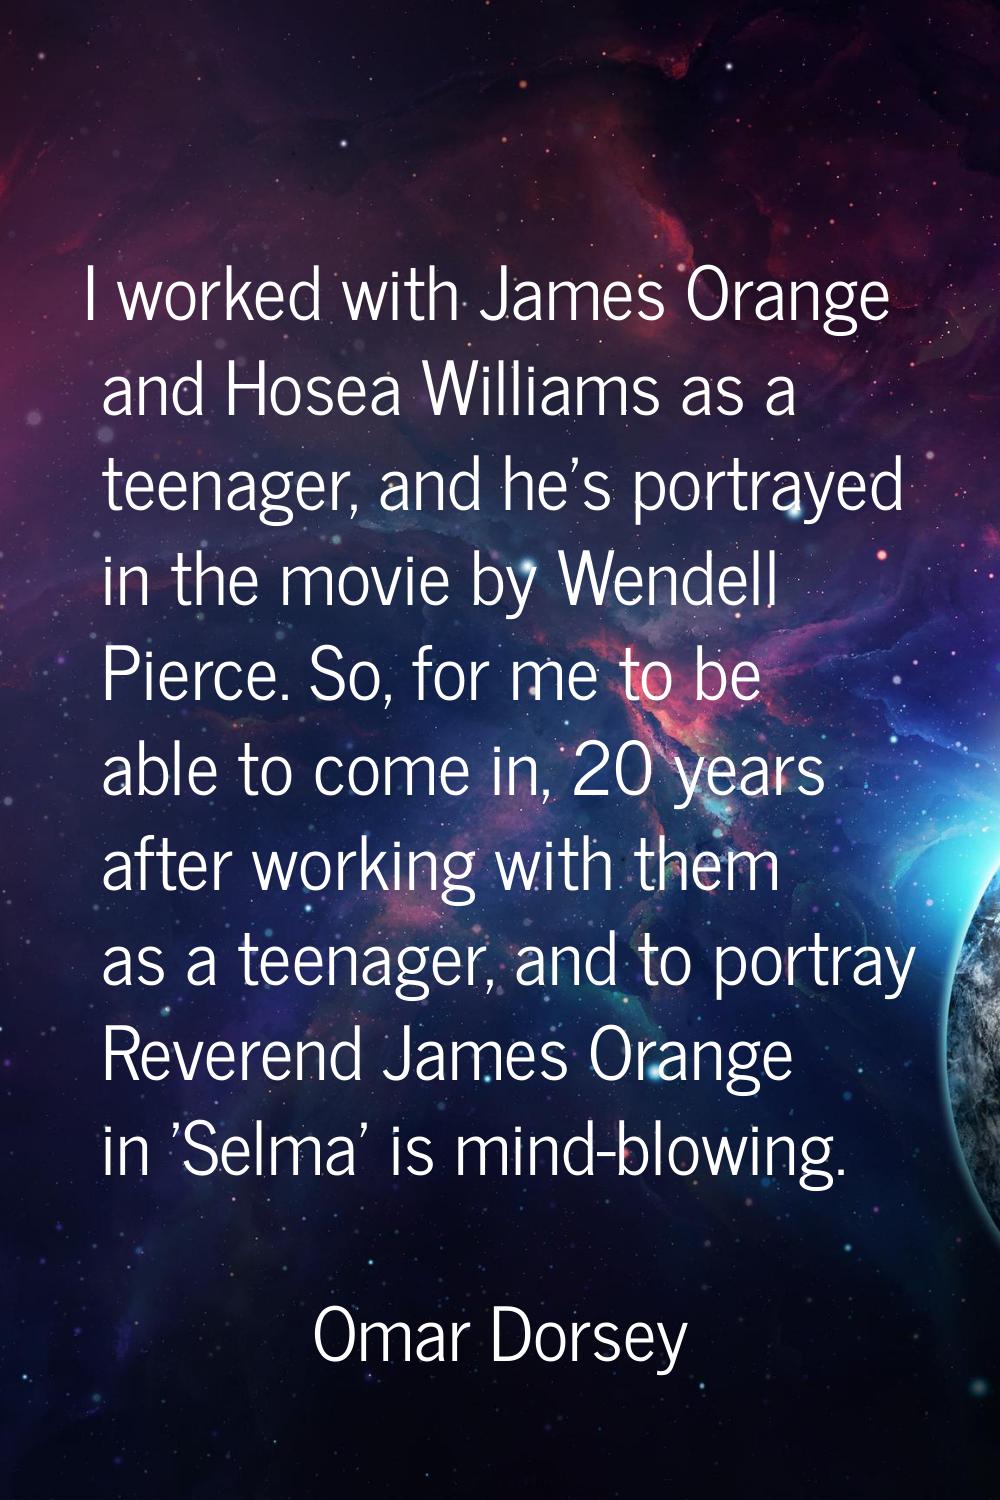 I worked with James Orange and Hosea Williams as a teenager, and he's portrayed in the movie by Wen